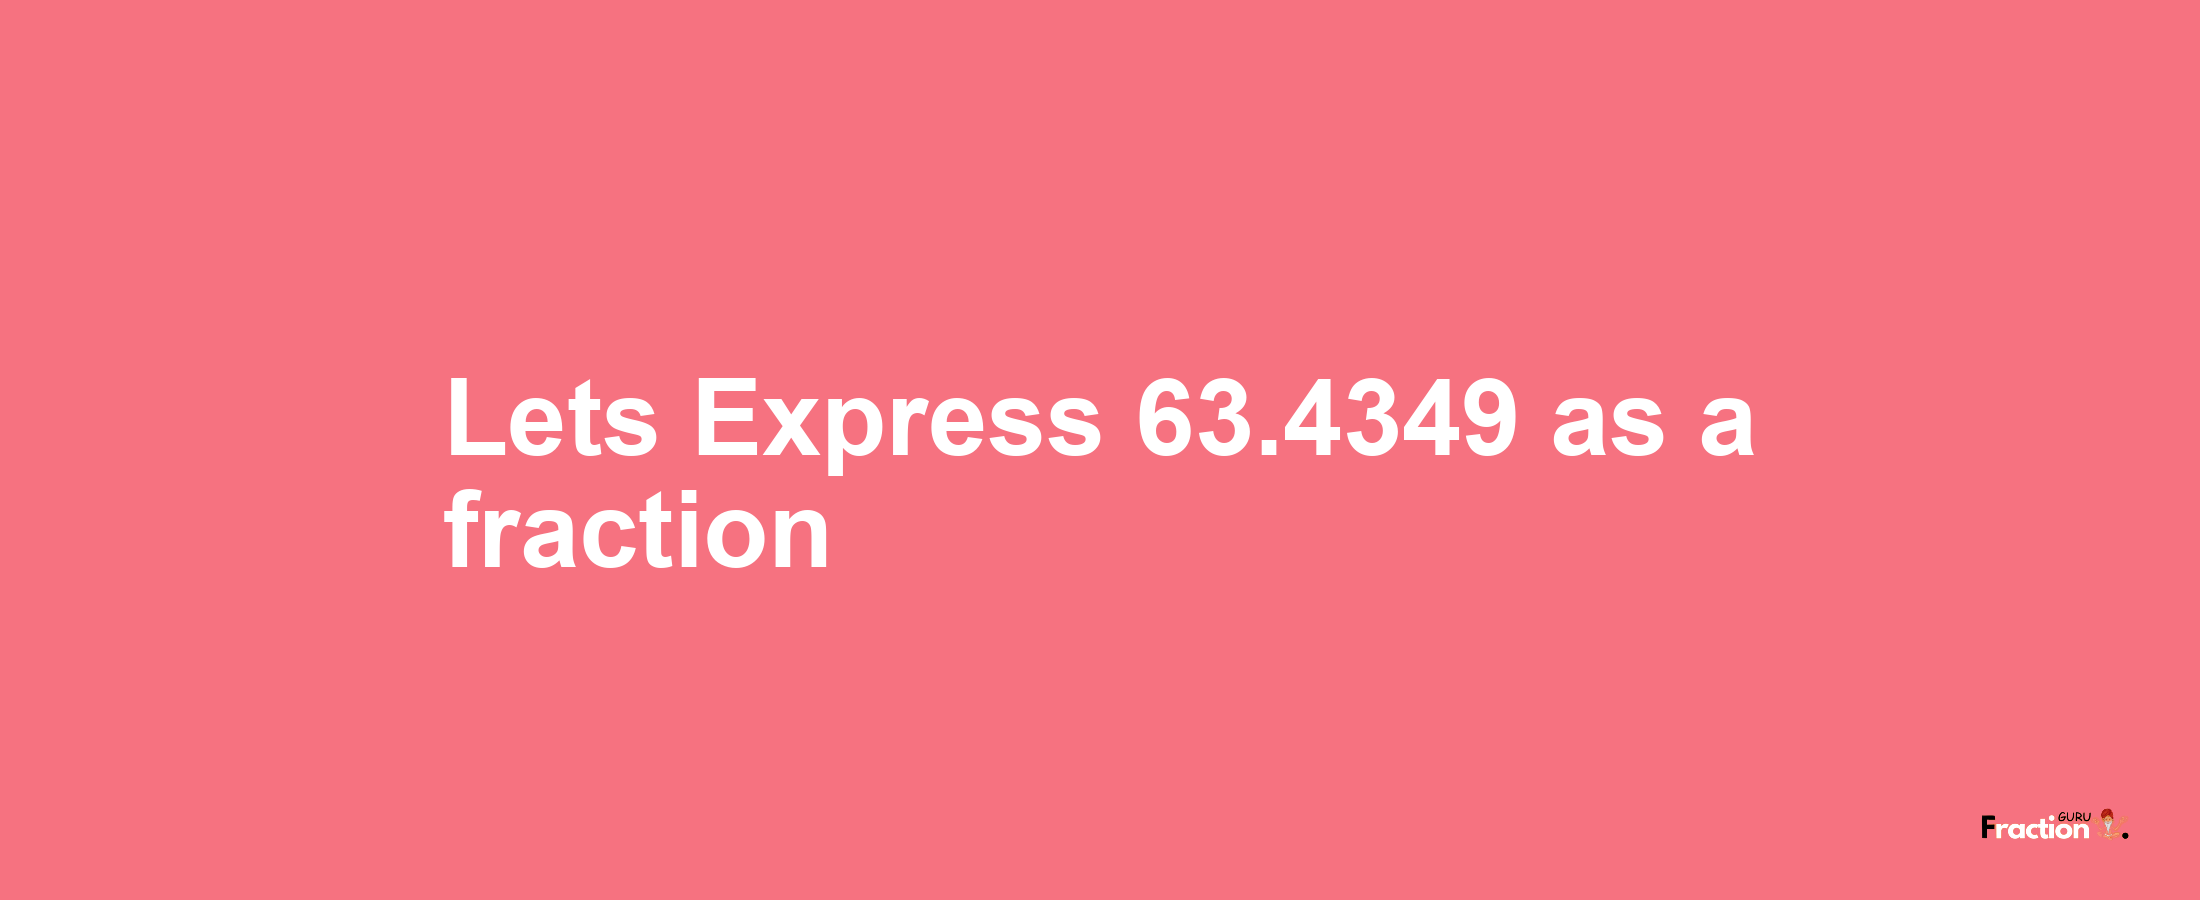 Lets Express 63.4349 as afraction